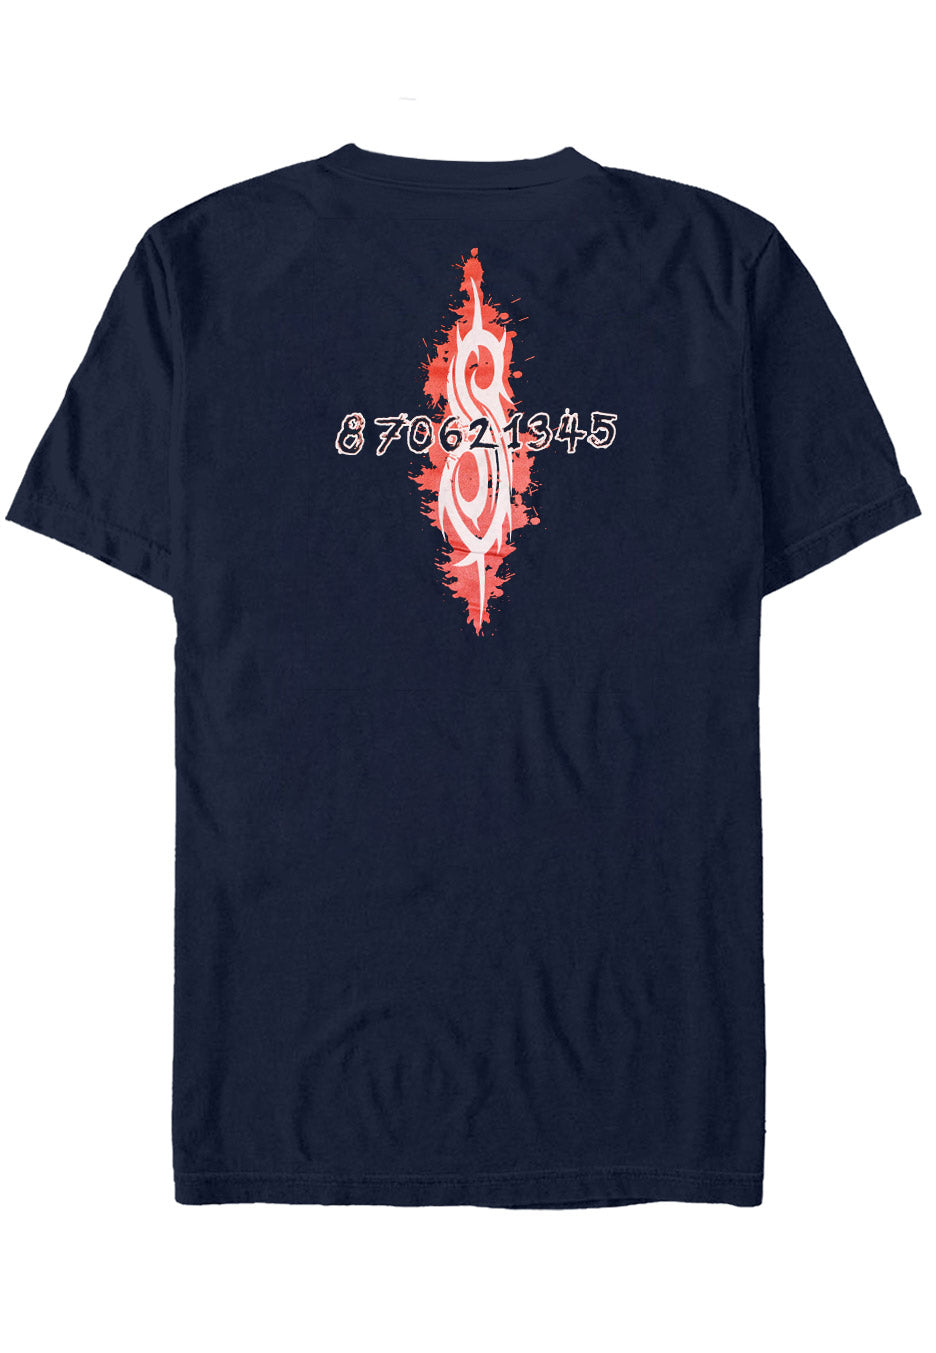 Slipknot - 20th Anniversary Red Jump Suits Navy - T-Shirt